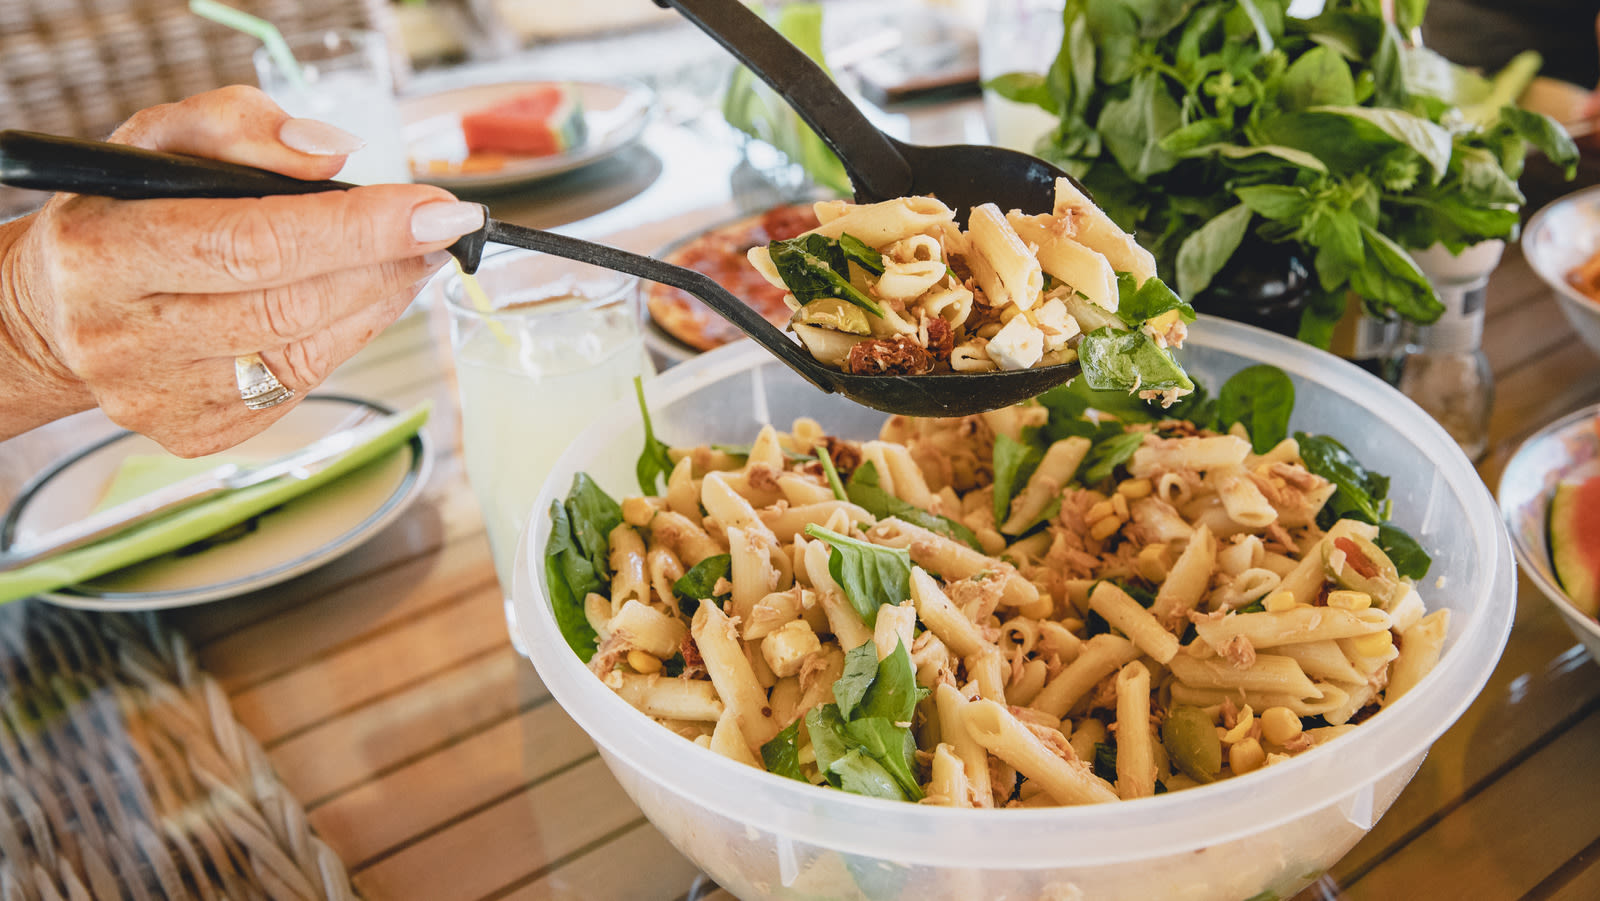 Liven Up A Classic Pasta Salad With Barbecue Sauce At Your Next Cookout